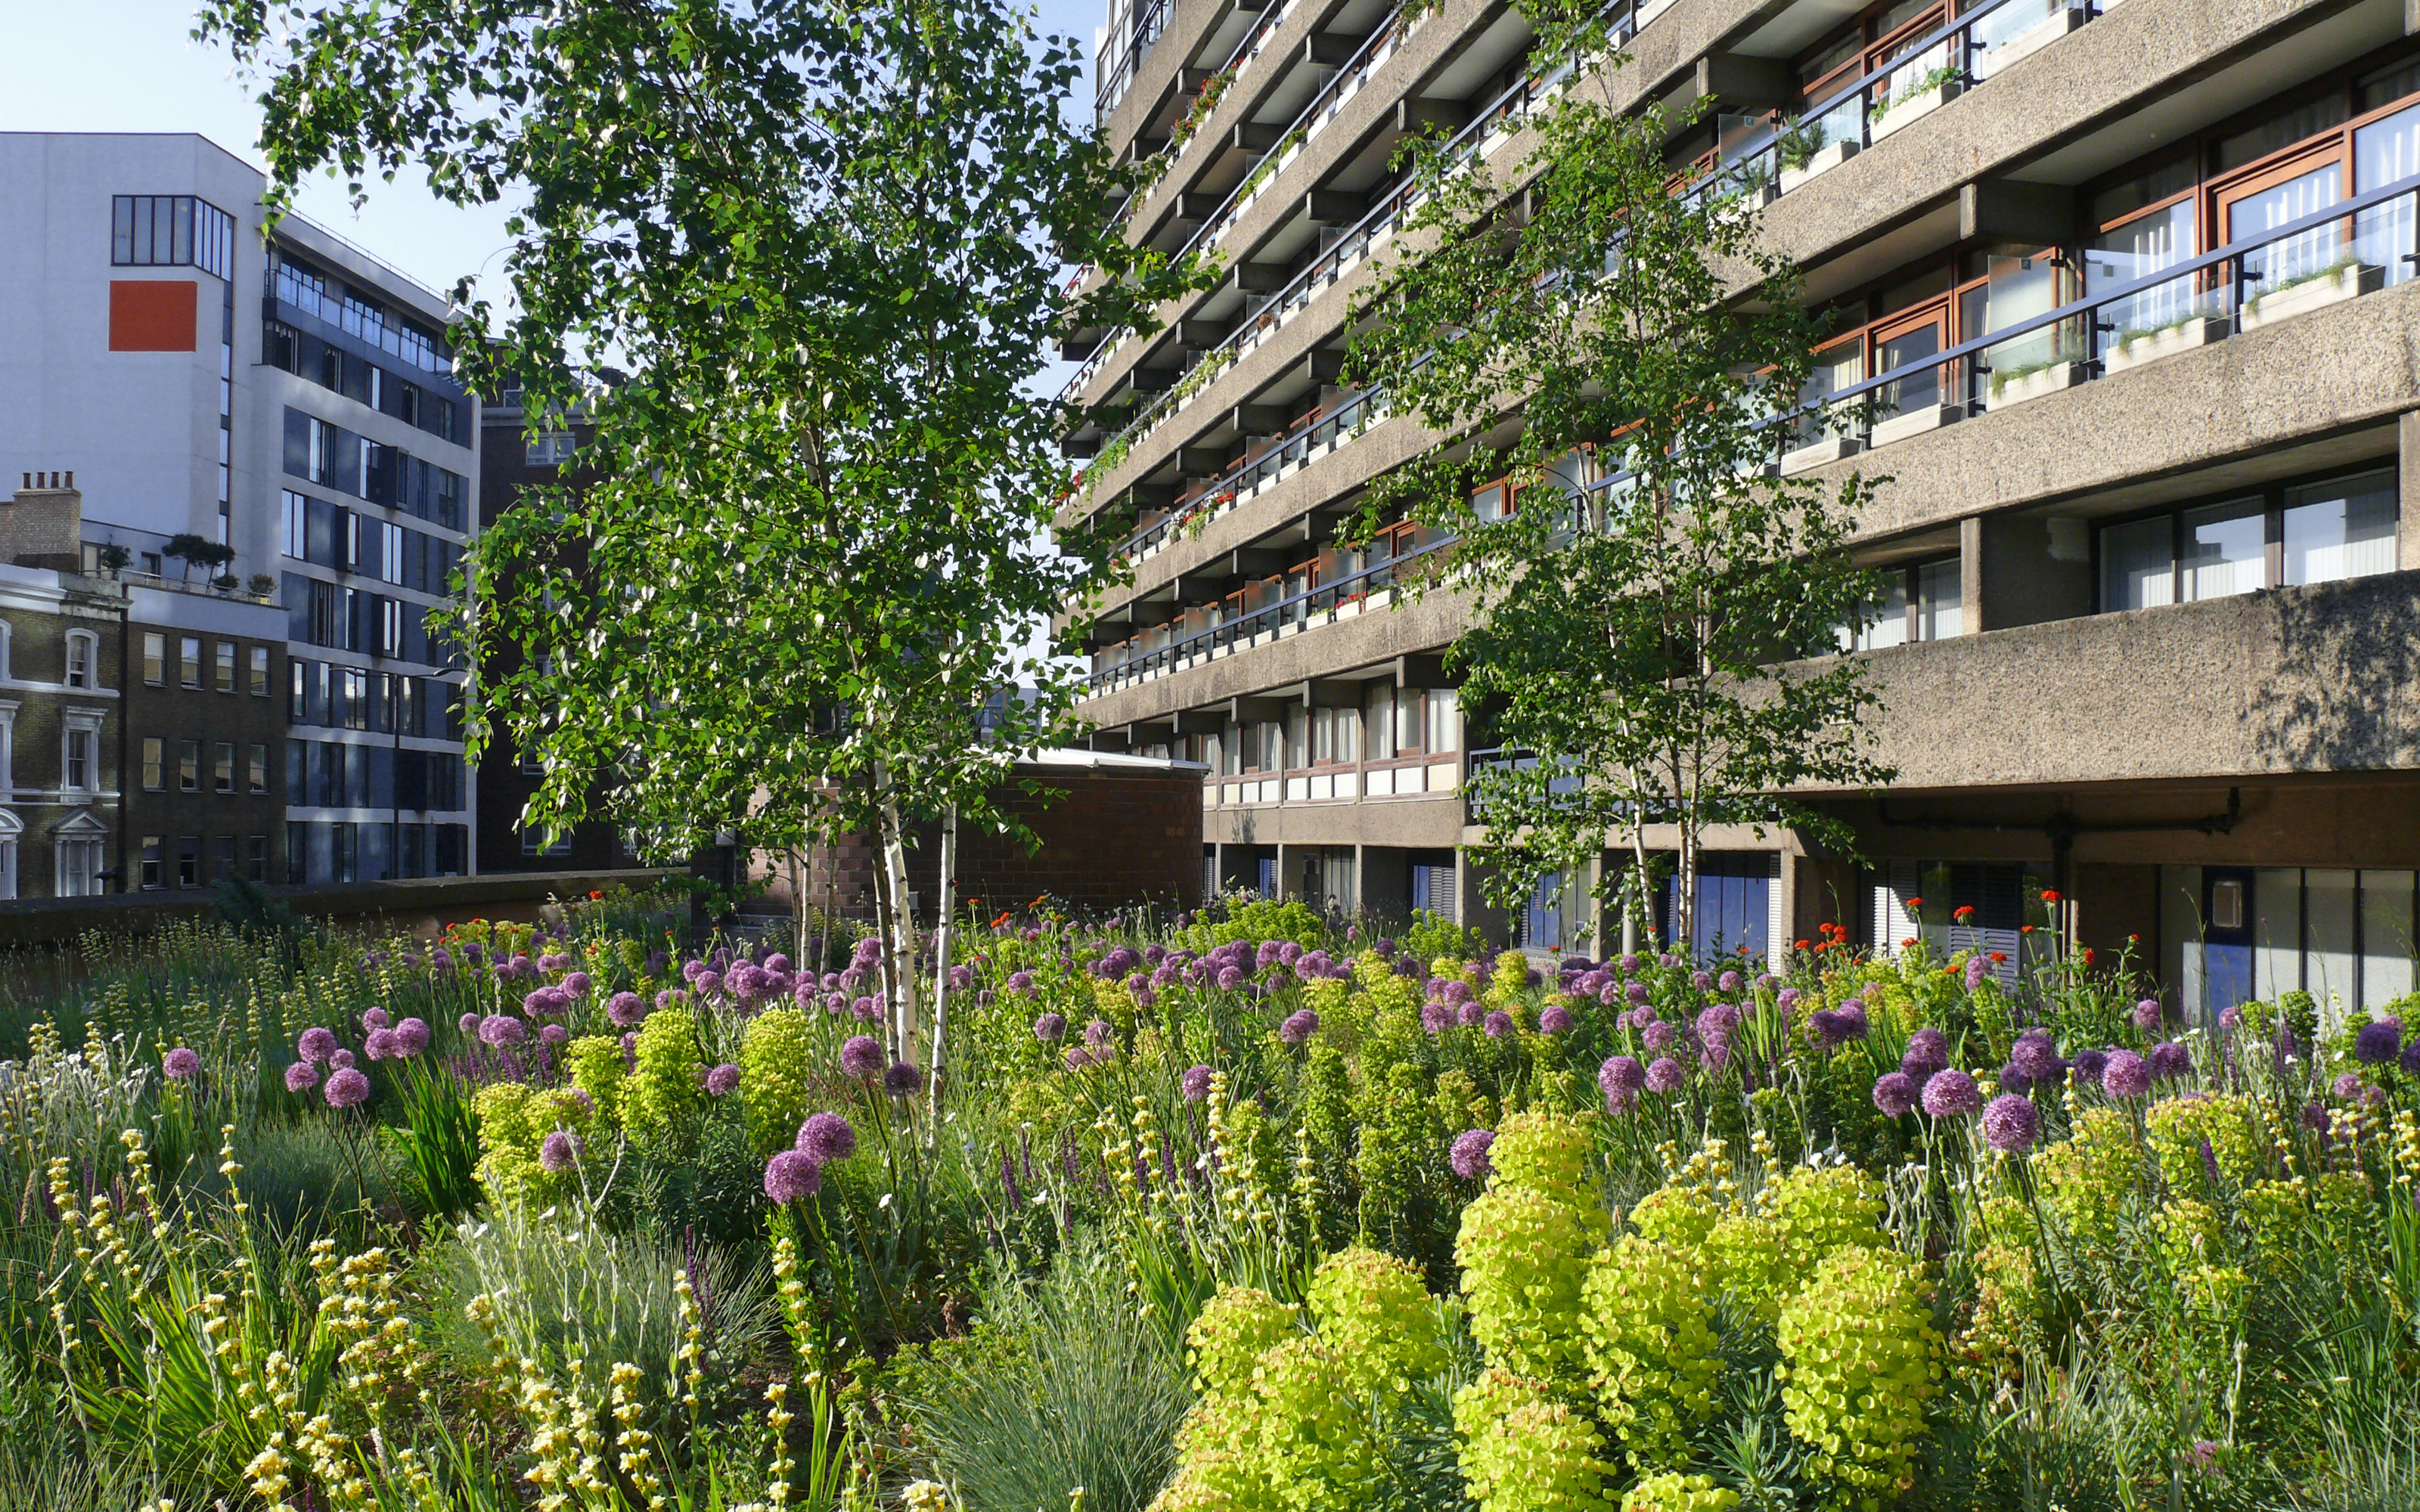 Birch trees amidst flowers and surrounded by residential blocks